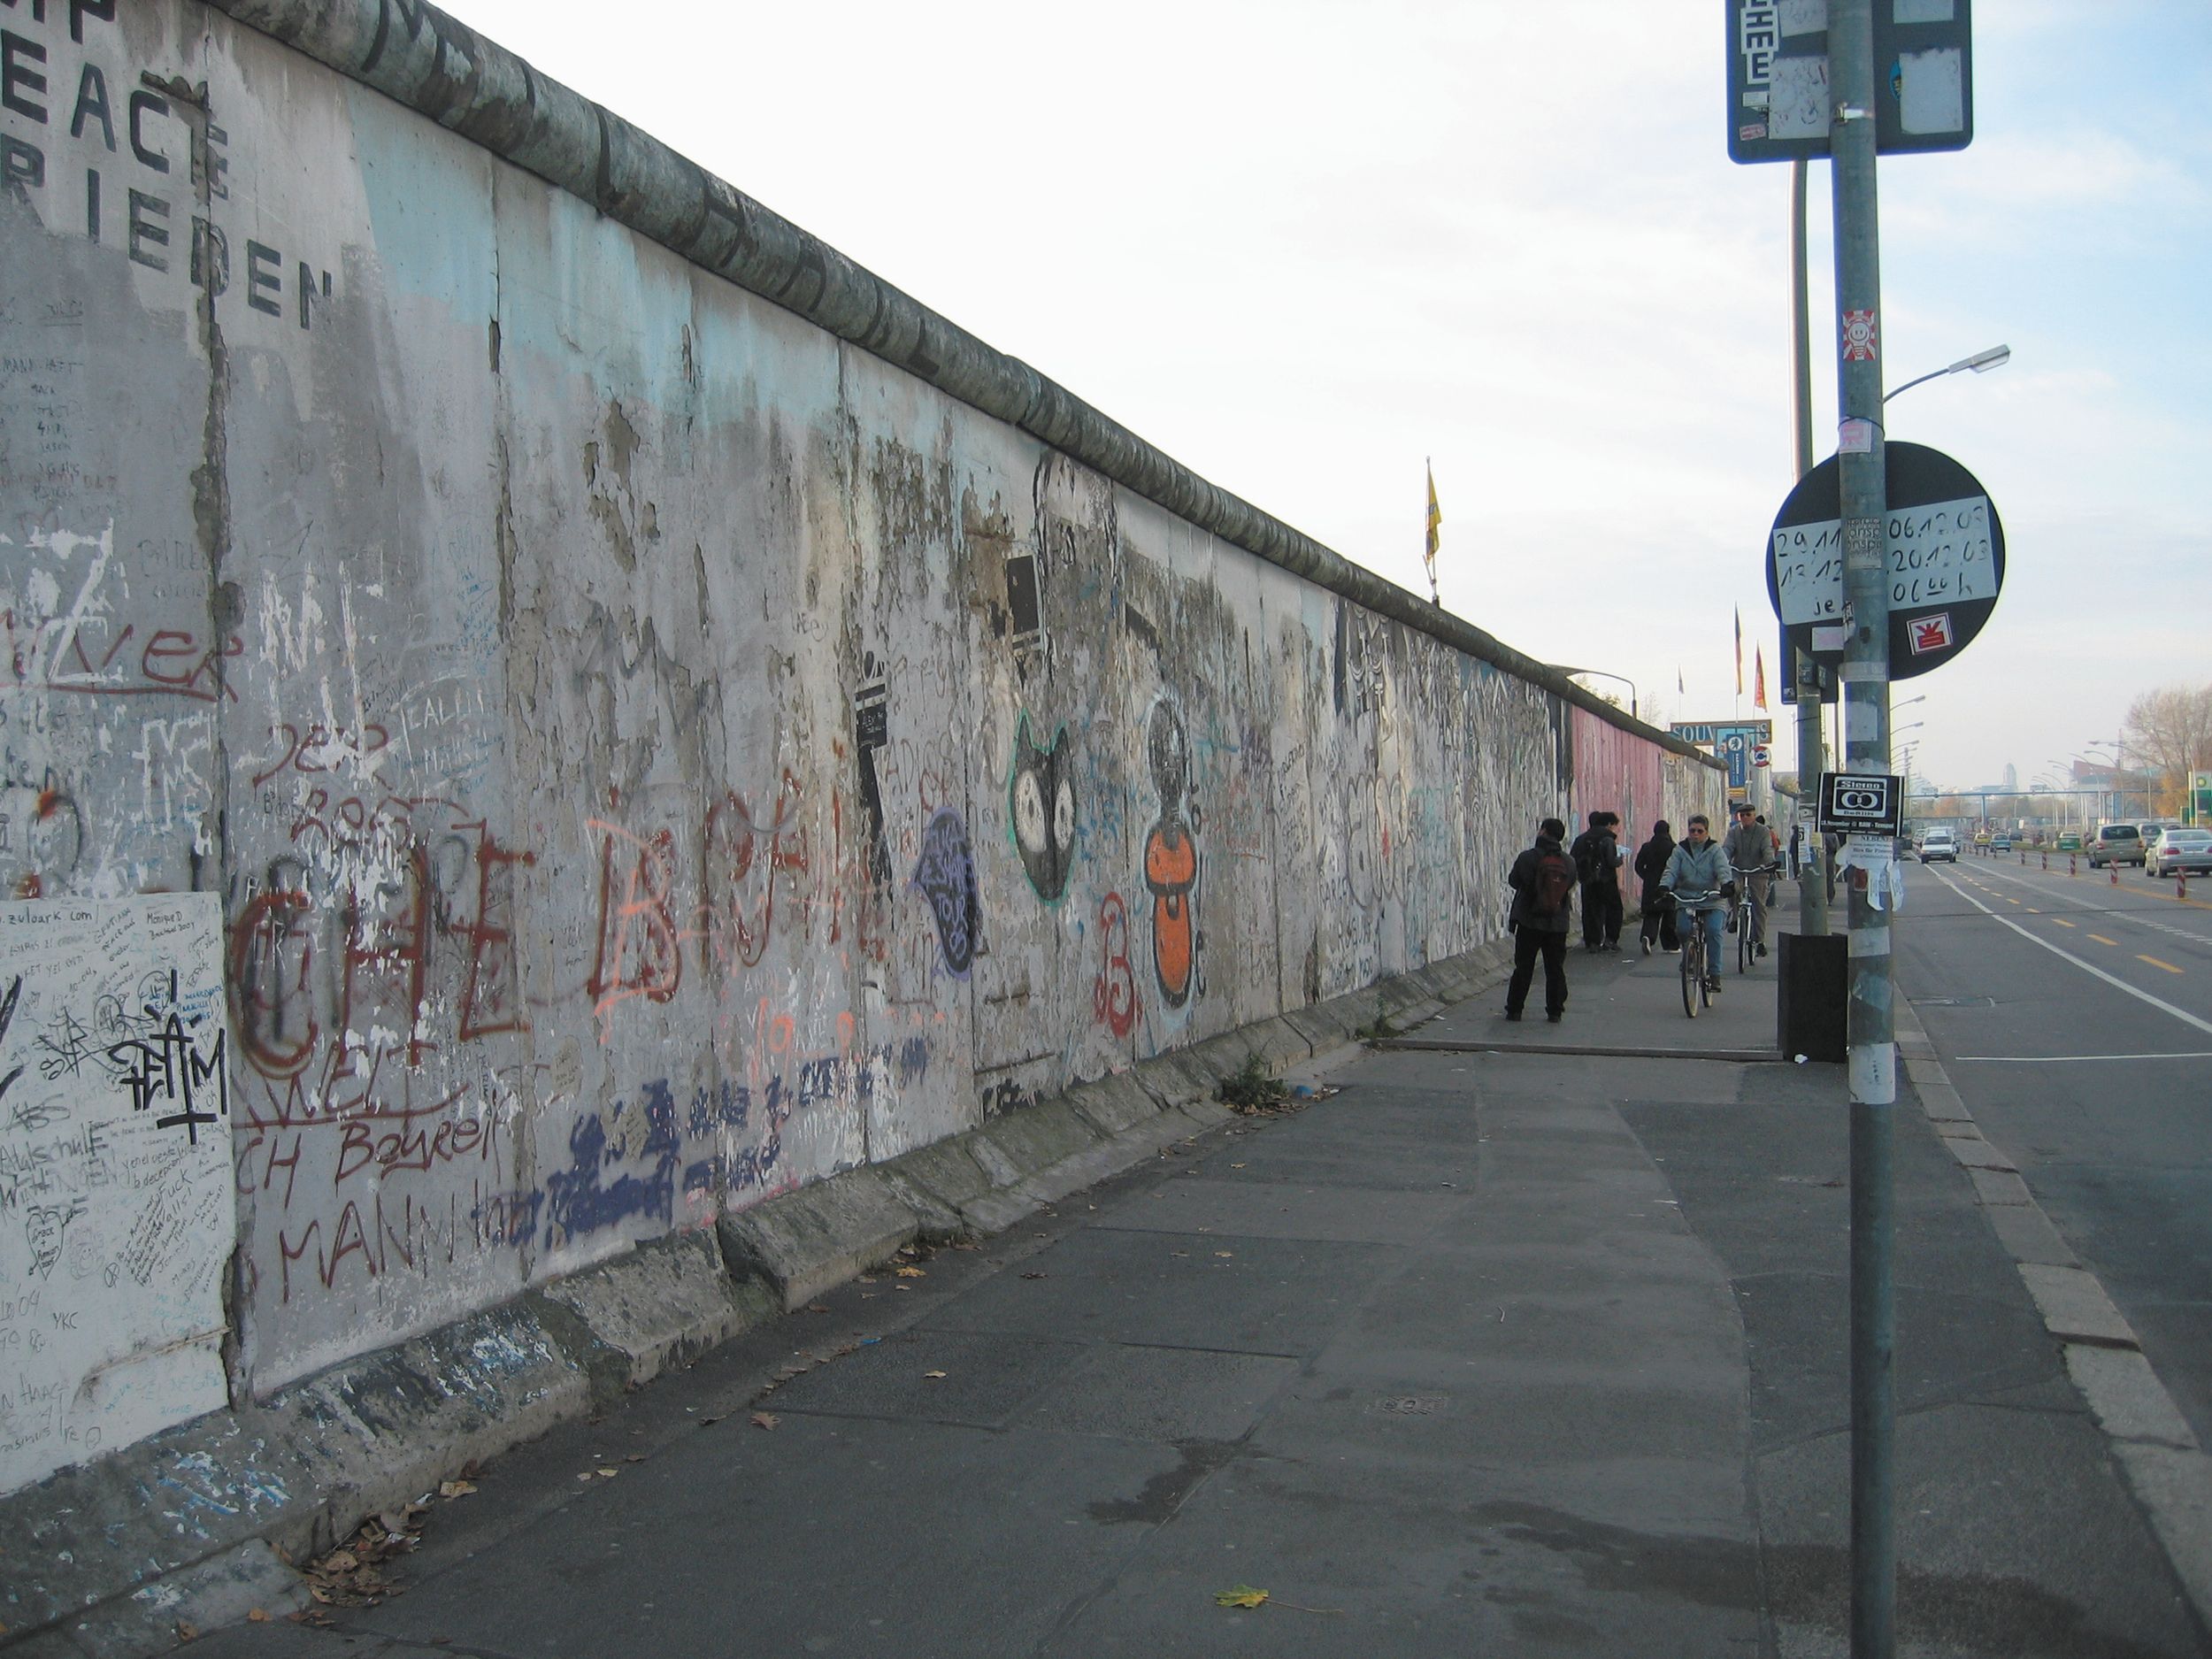 A remnant of the Berlin Wall today.